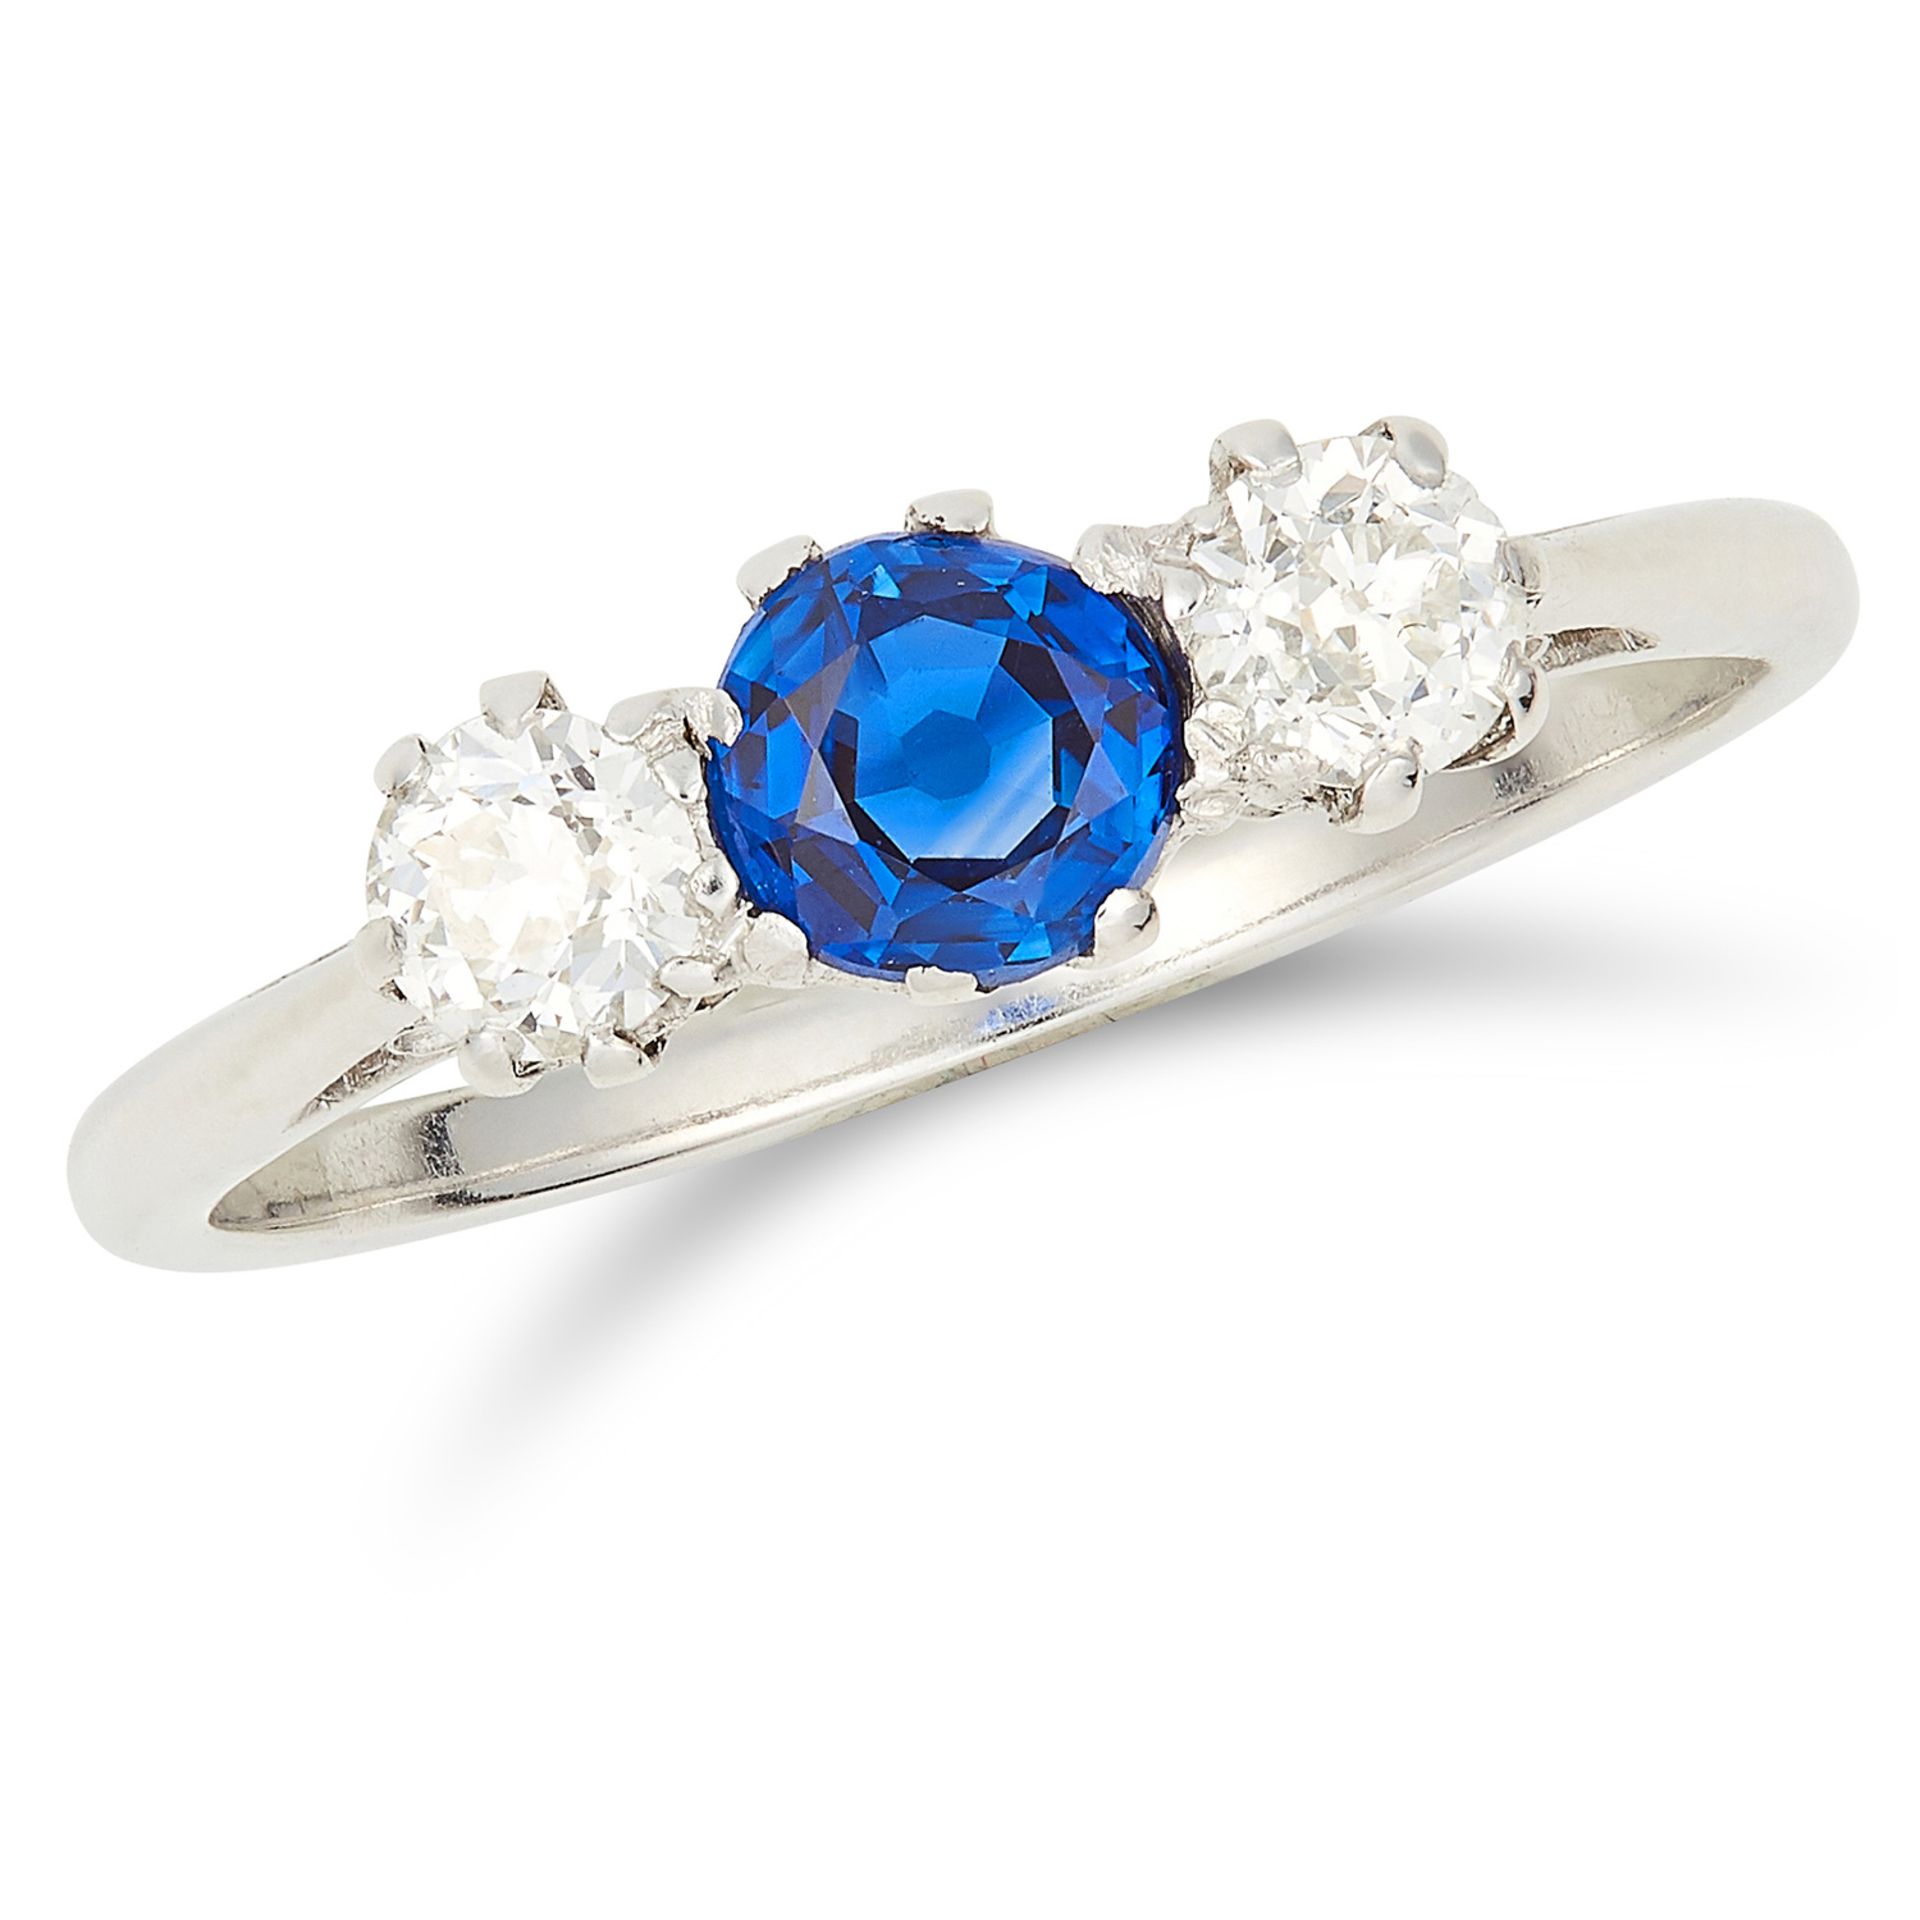 0.59 CARAT SAPPHIRE AND DIAMOND THREE STONE RING in white gold or platinum, comprising of a round